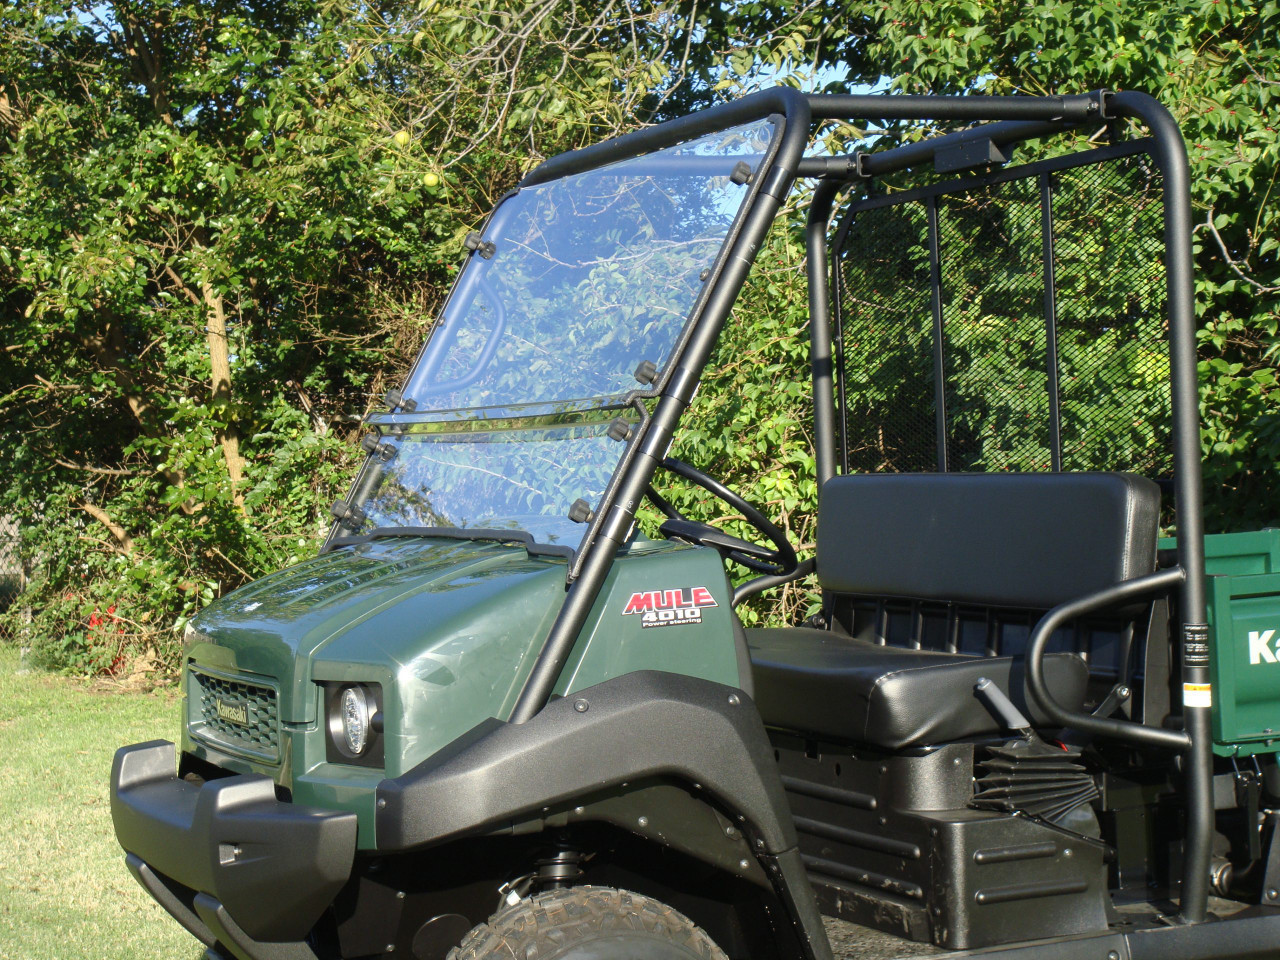 3 Star side x side Kawasaki Mule 3000/3010 Trans windshield front and side angle view